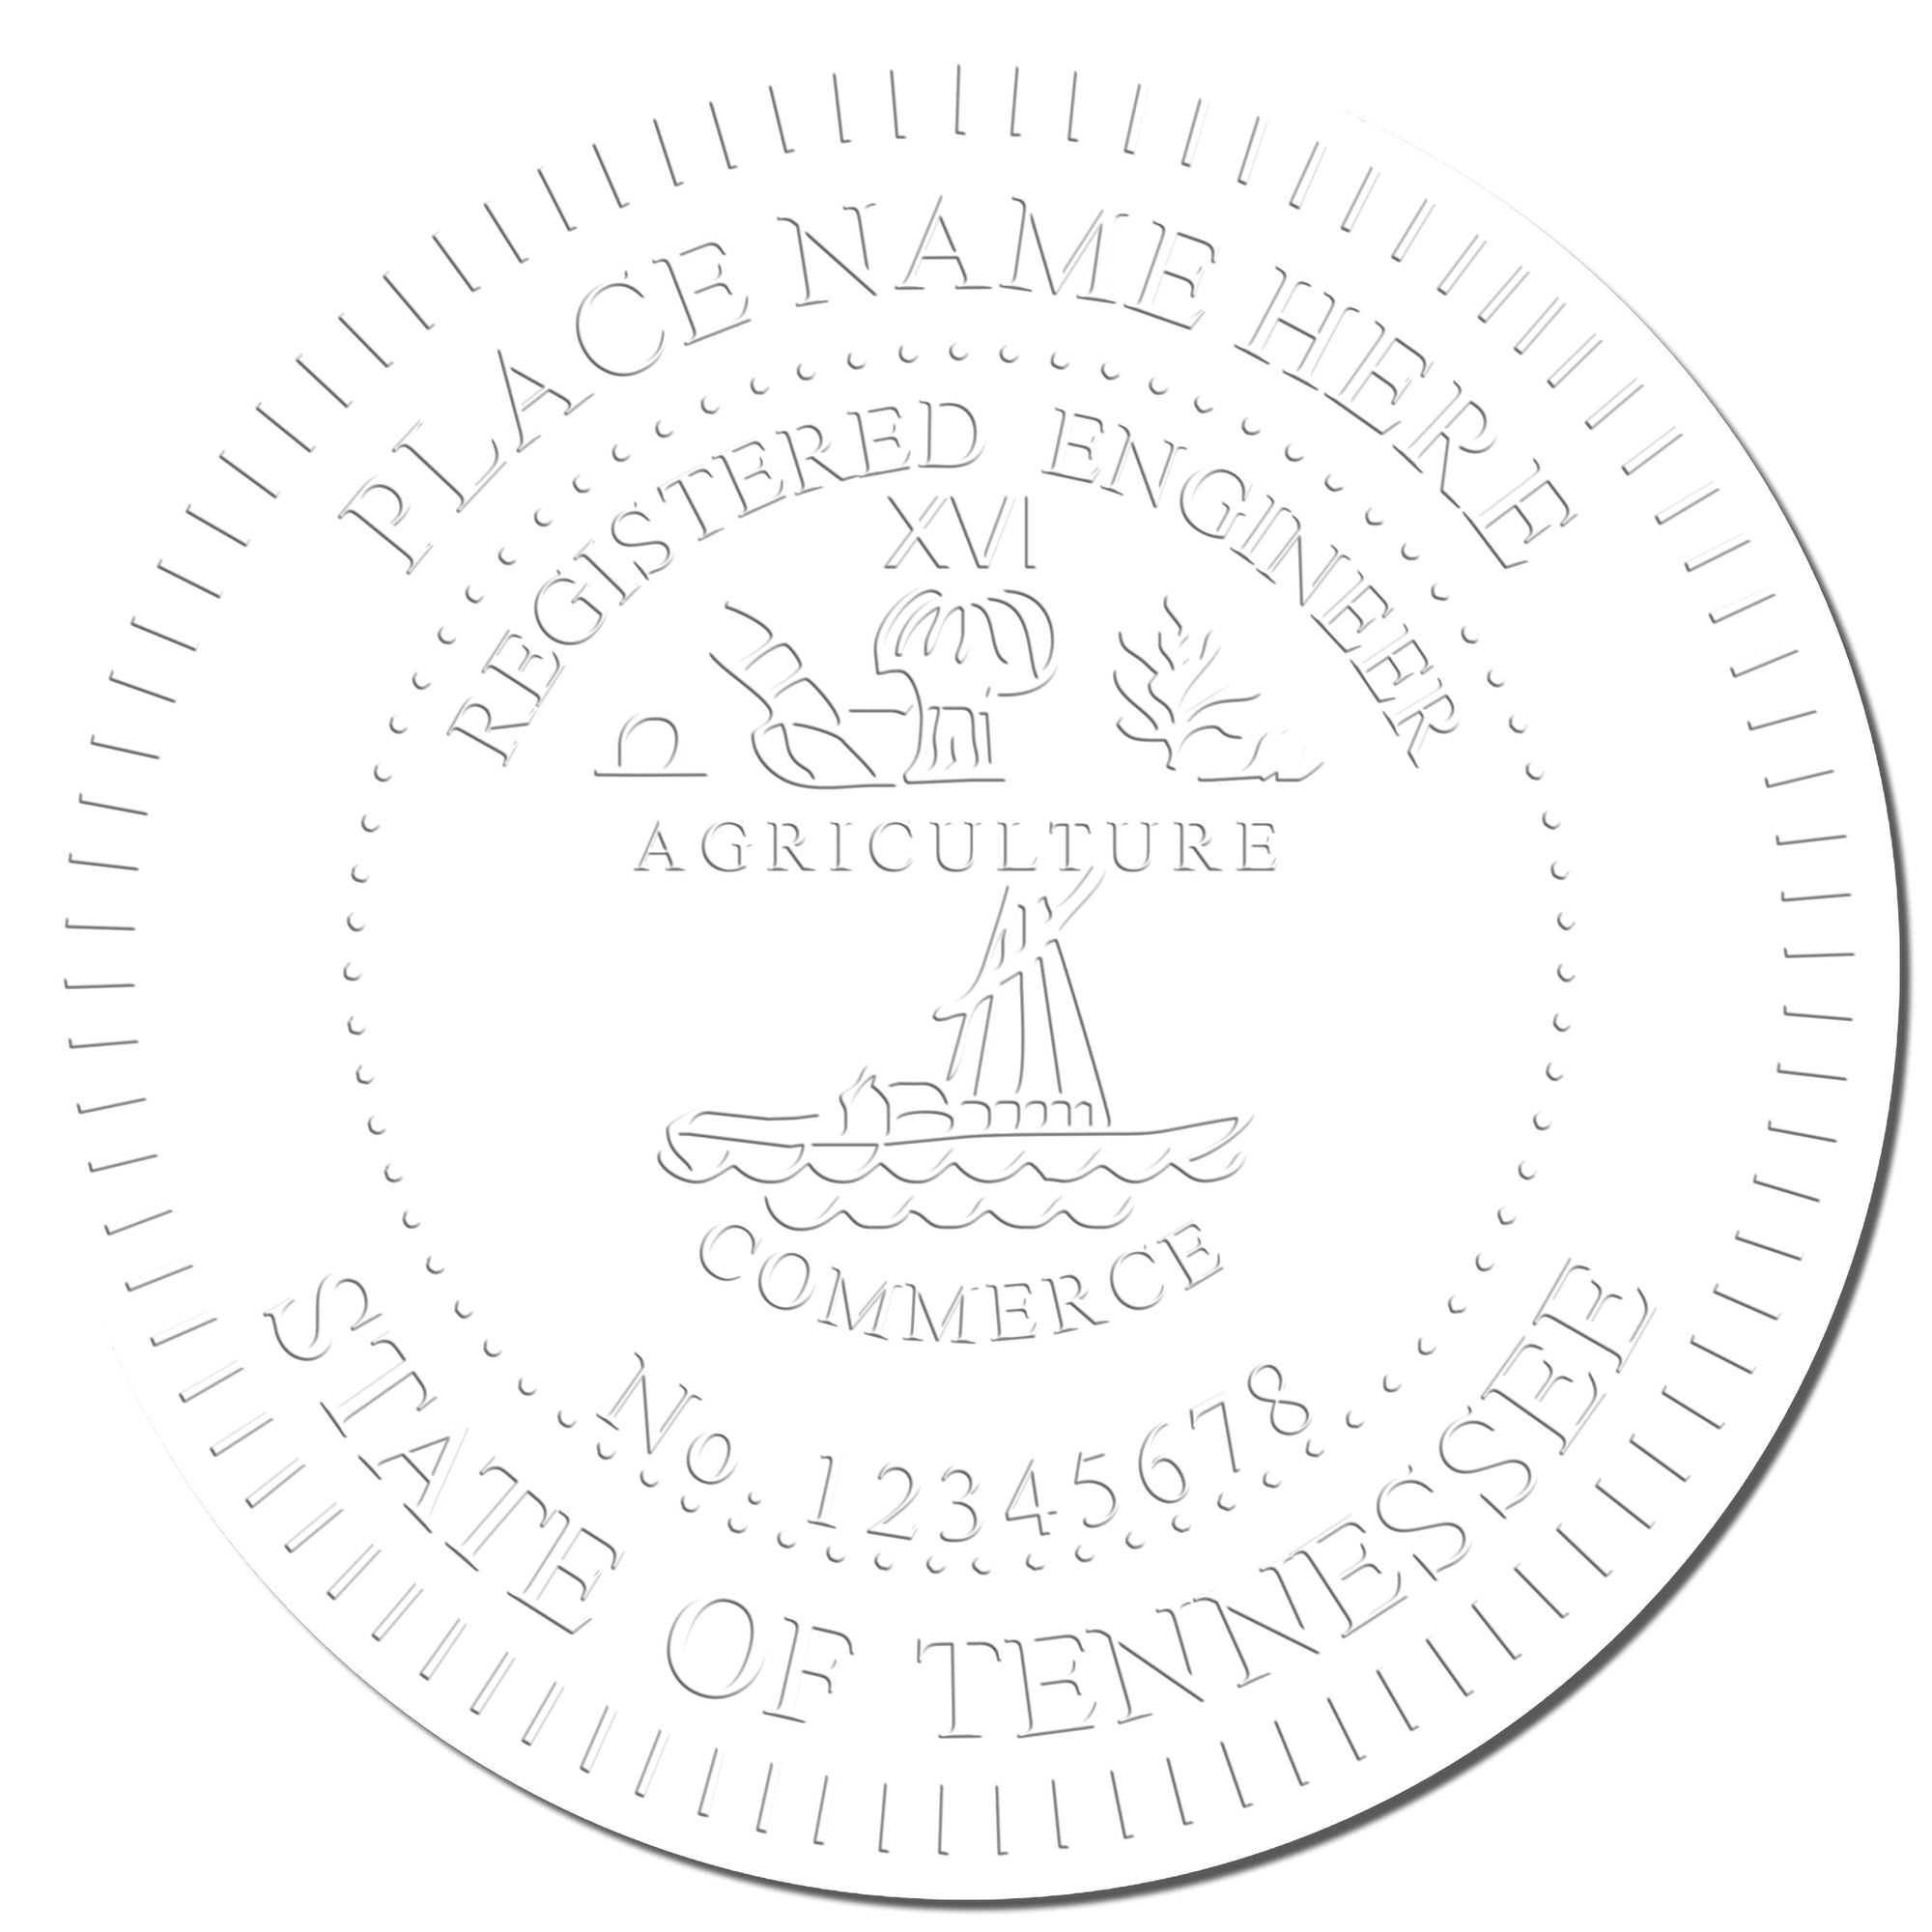 The main image for the Tennessee Engineer Desk Seal depicting a sample of the imprint and electronic files